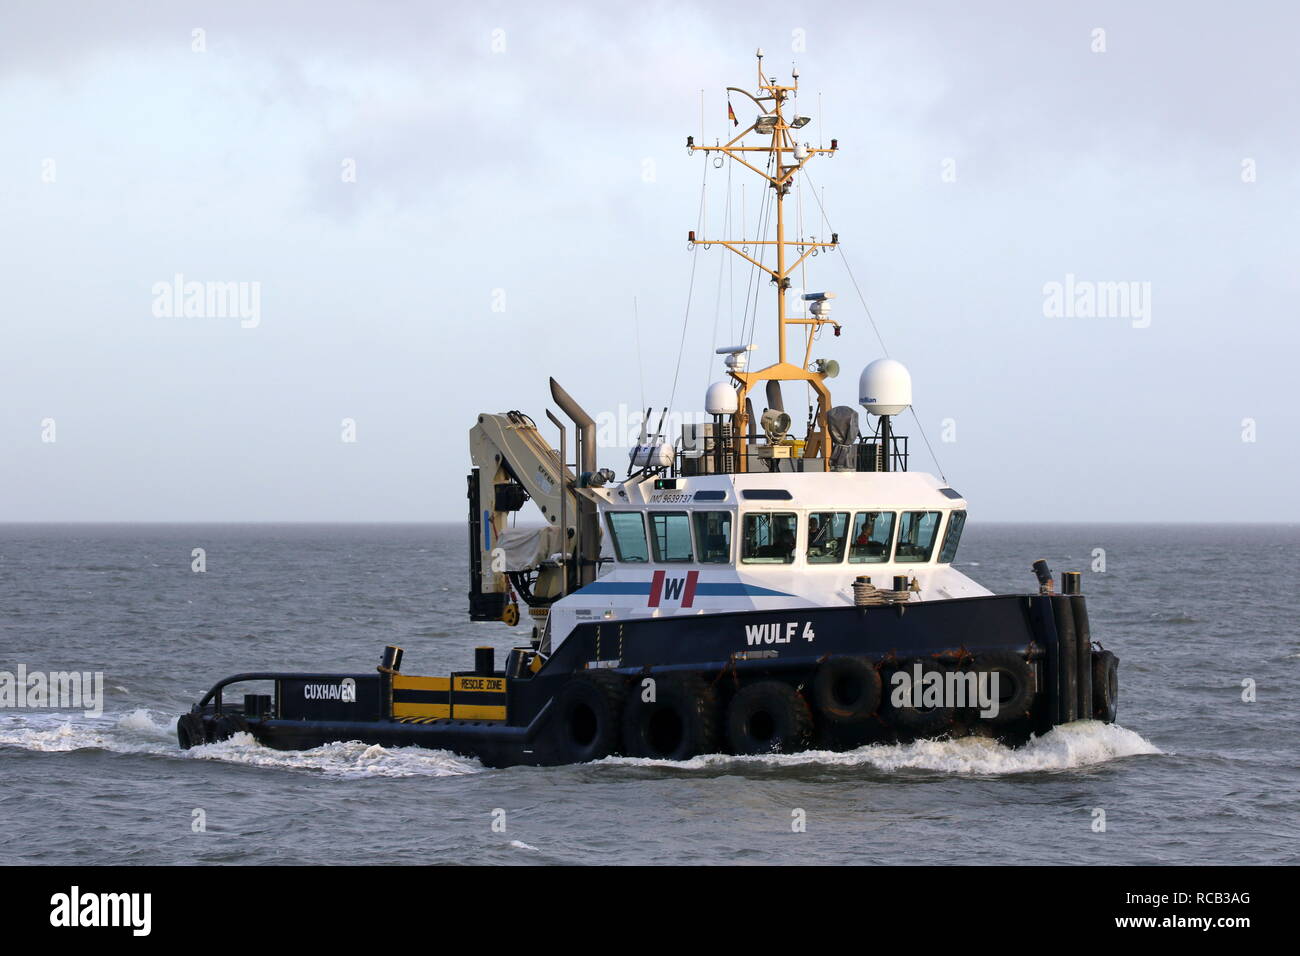 The harbor tug Wulf 4 operates on 30 December 2018 in front of the port of Cuxhaven on the Elbe. Stock Photo